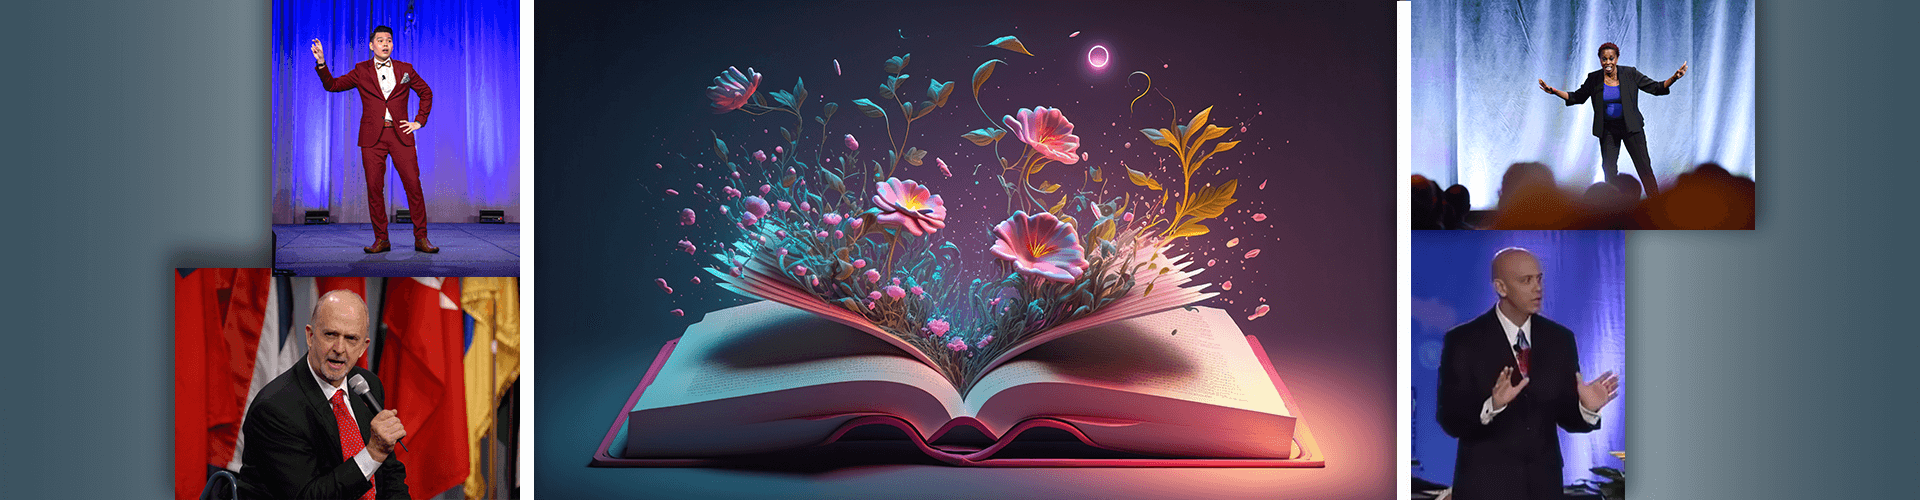 Whimsical scene of flowers coming out of open book